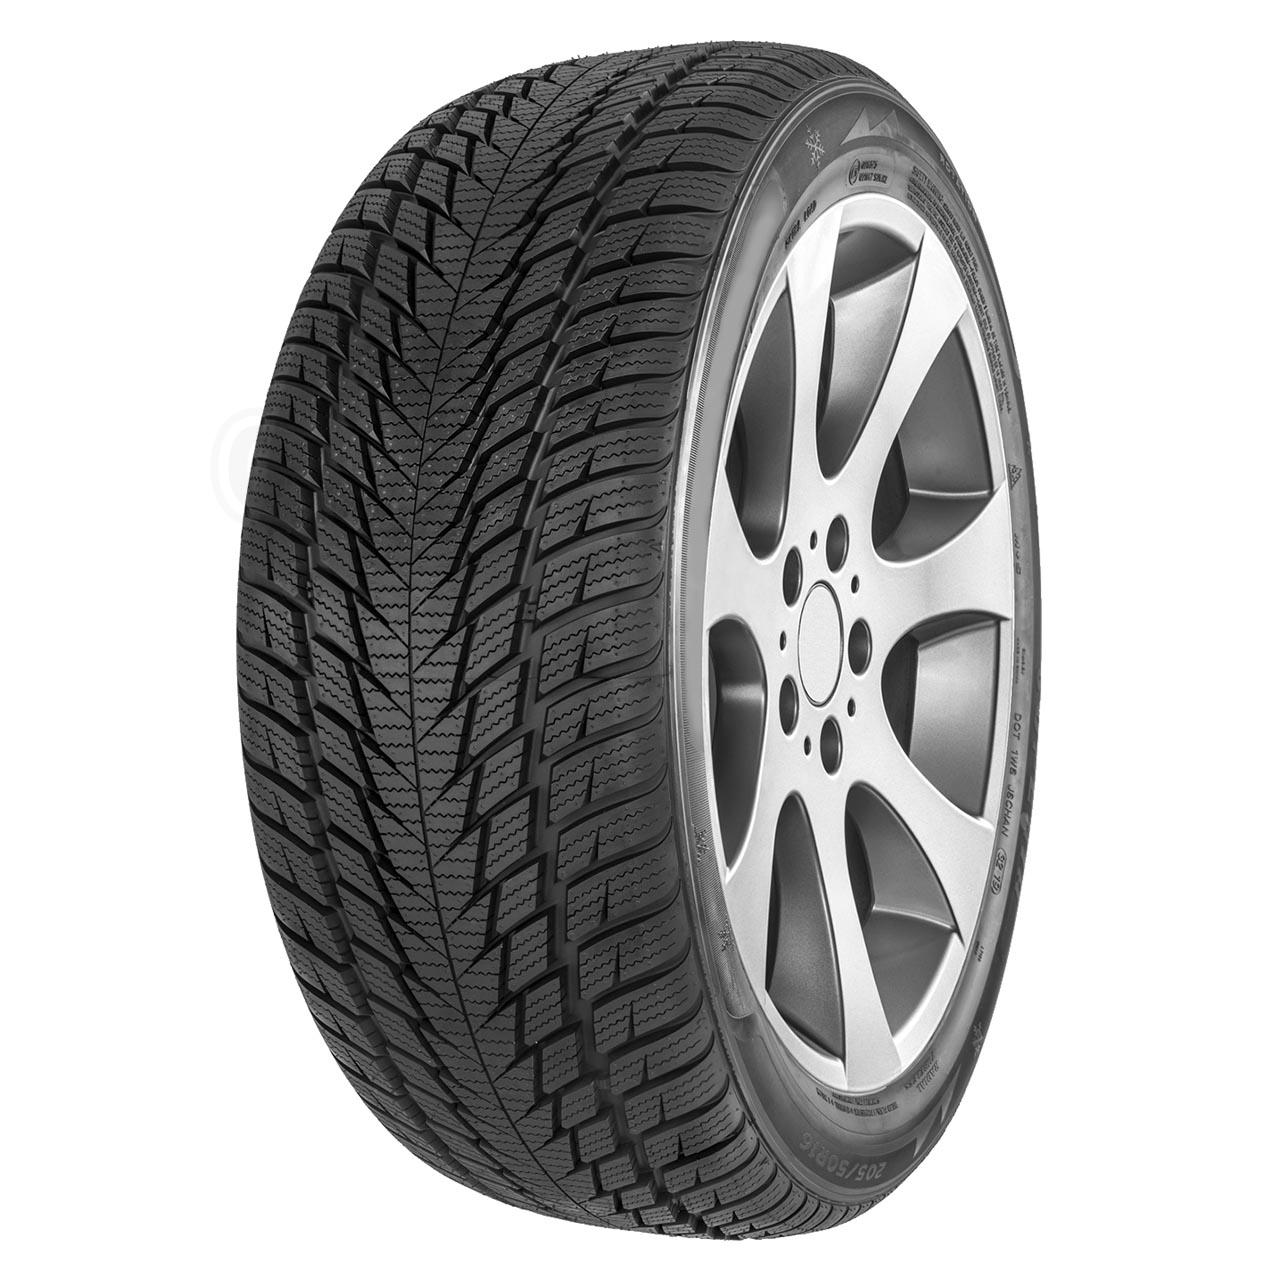 Fortuna Gowin UHP 2 235/50R18 101V XL